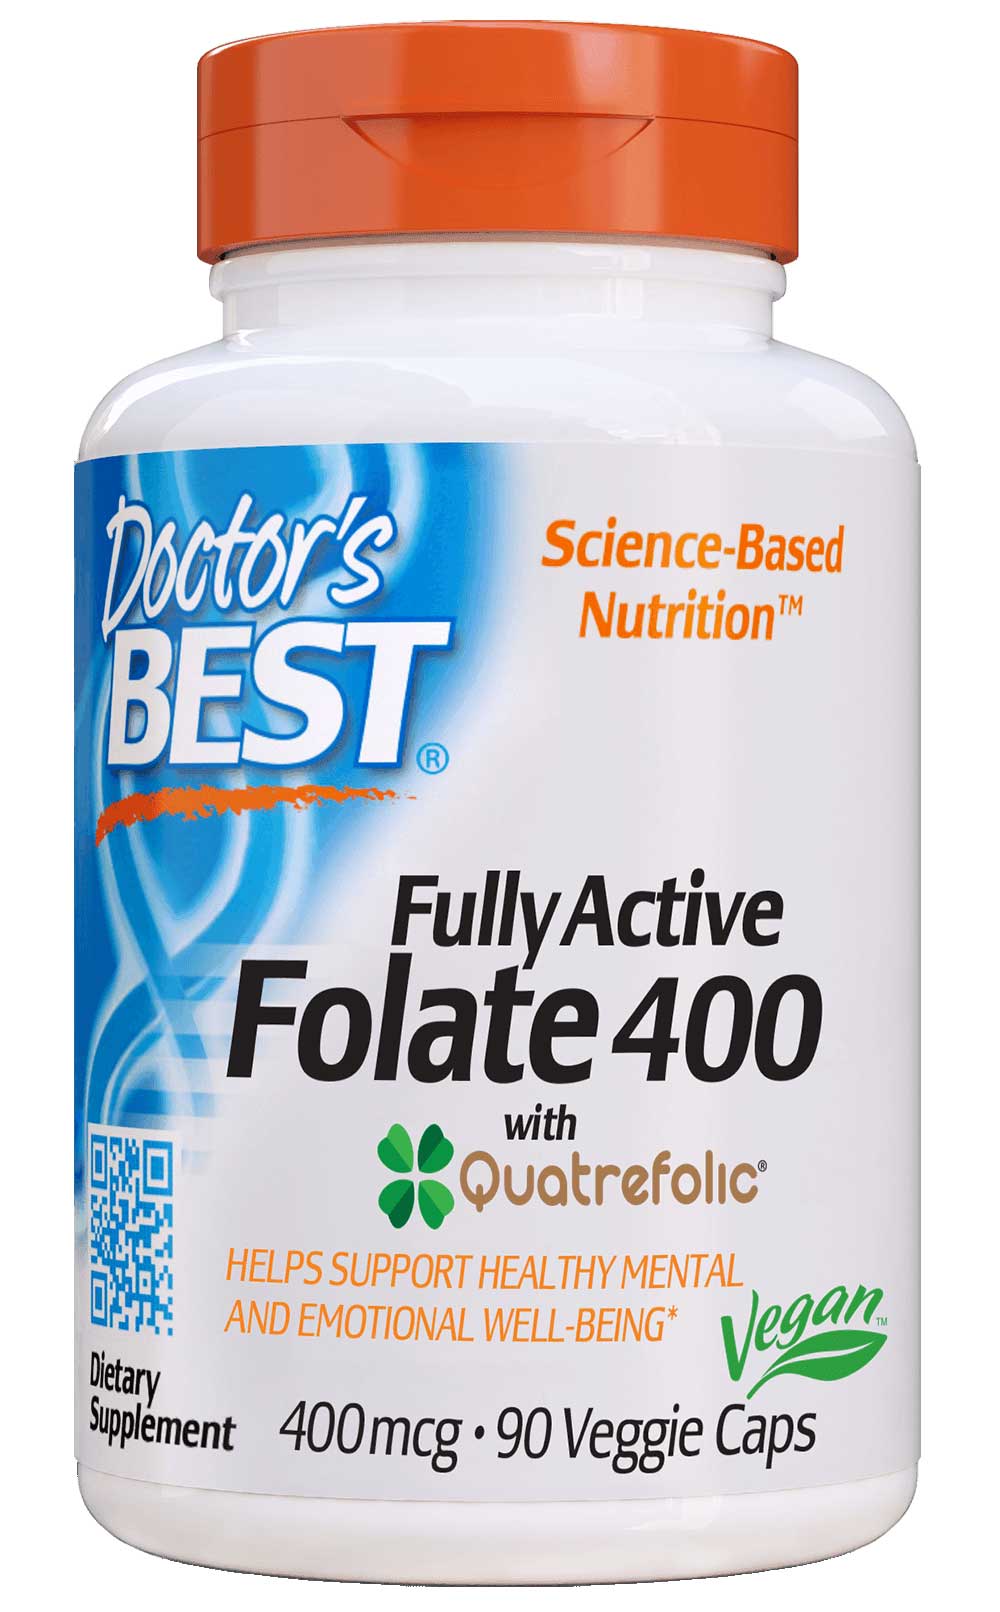 Doctor's Best Fully Active Folate 400 with Quatrefolic